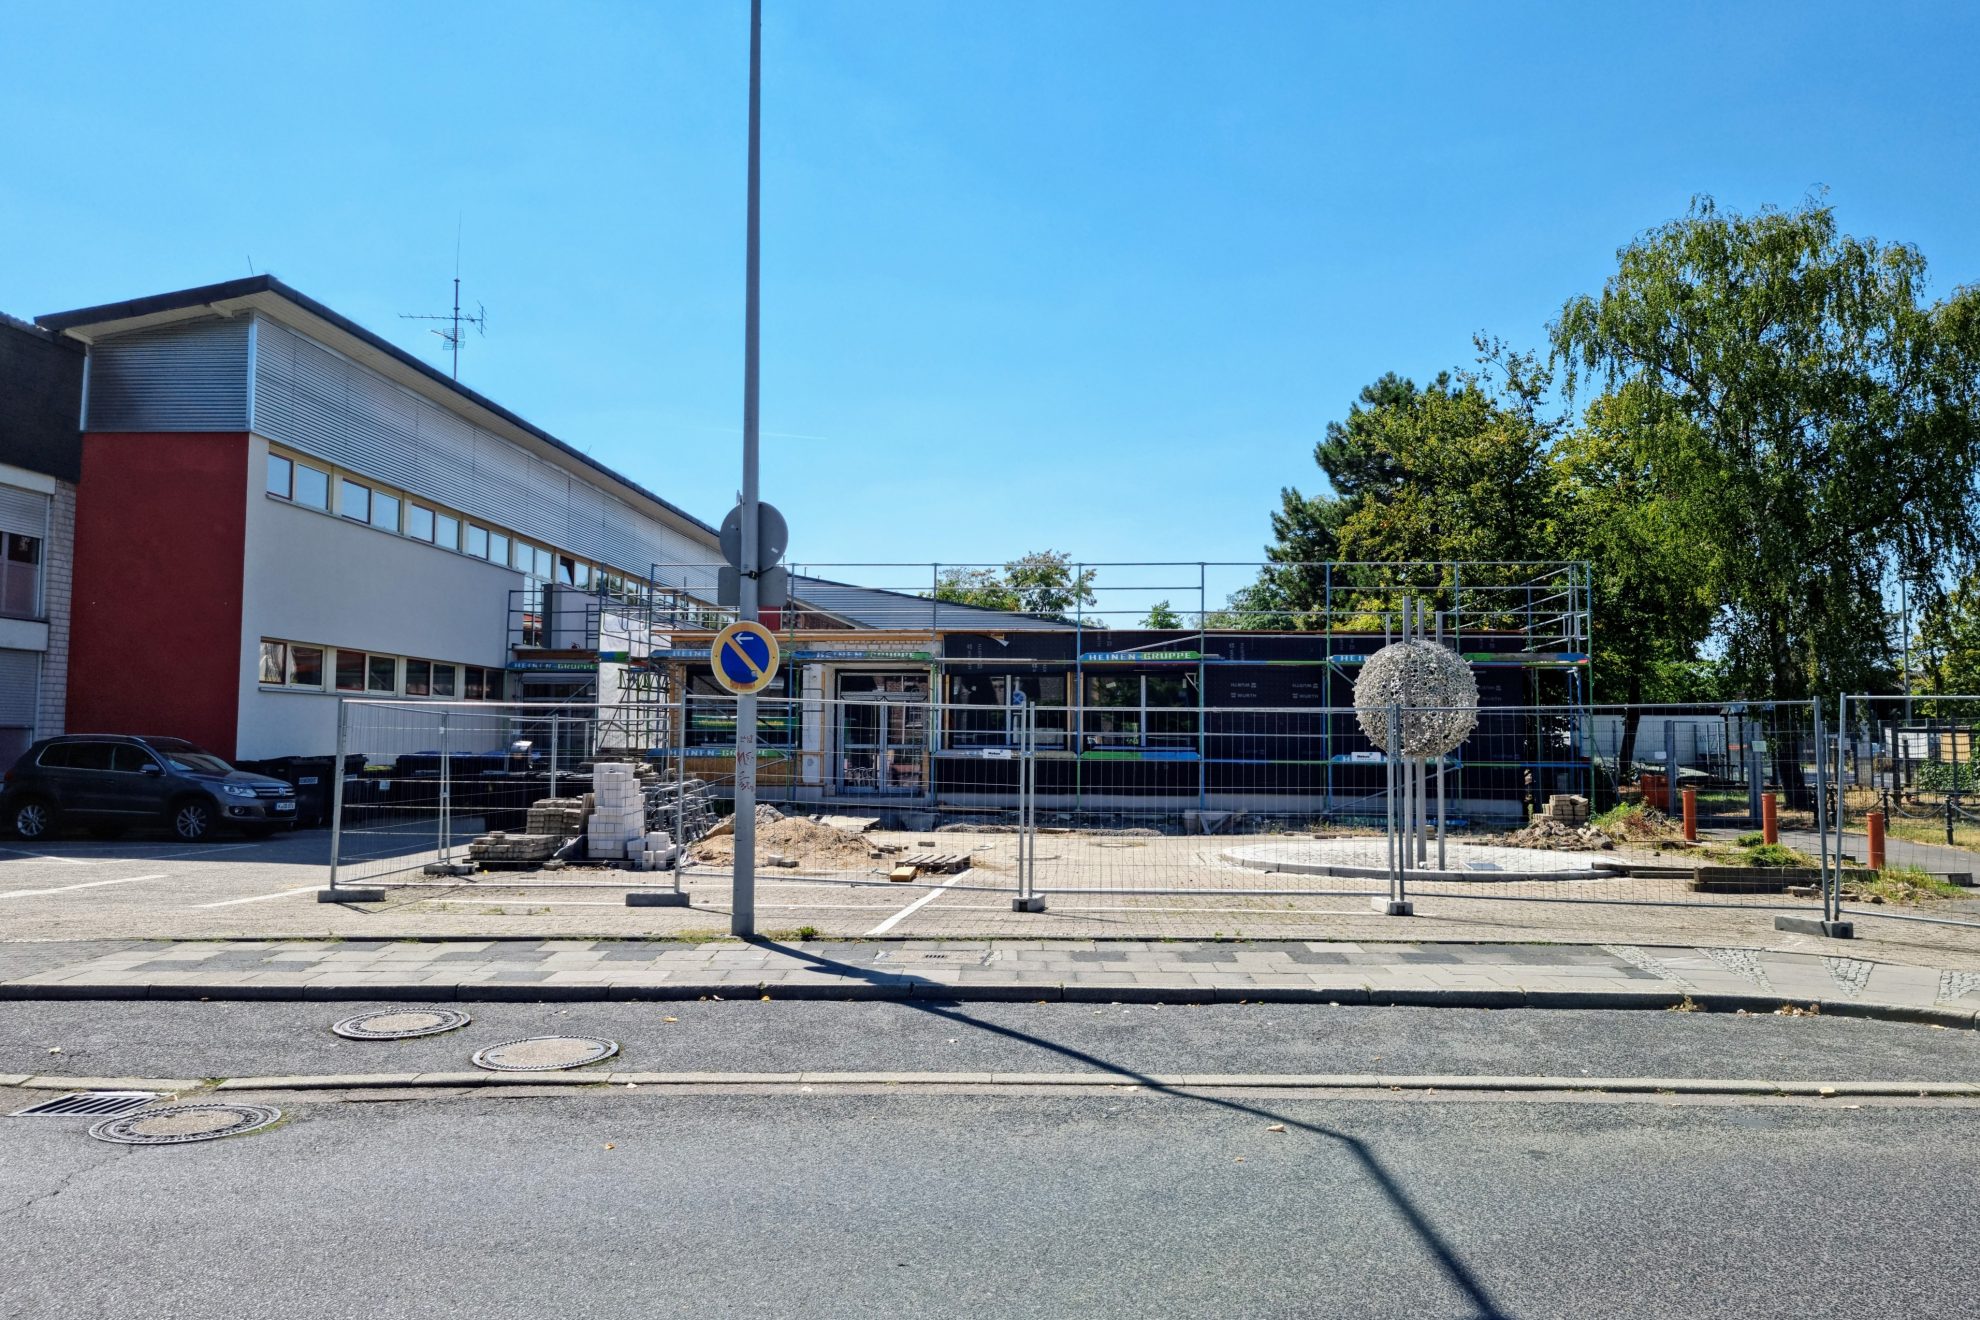 Baustelle Horionschule August 2022